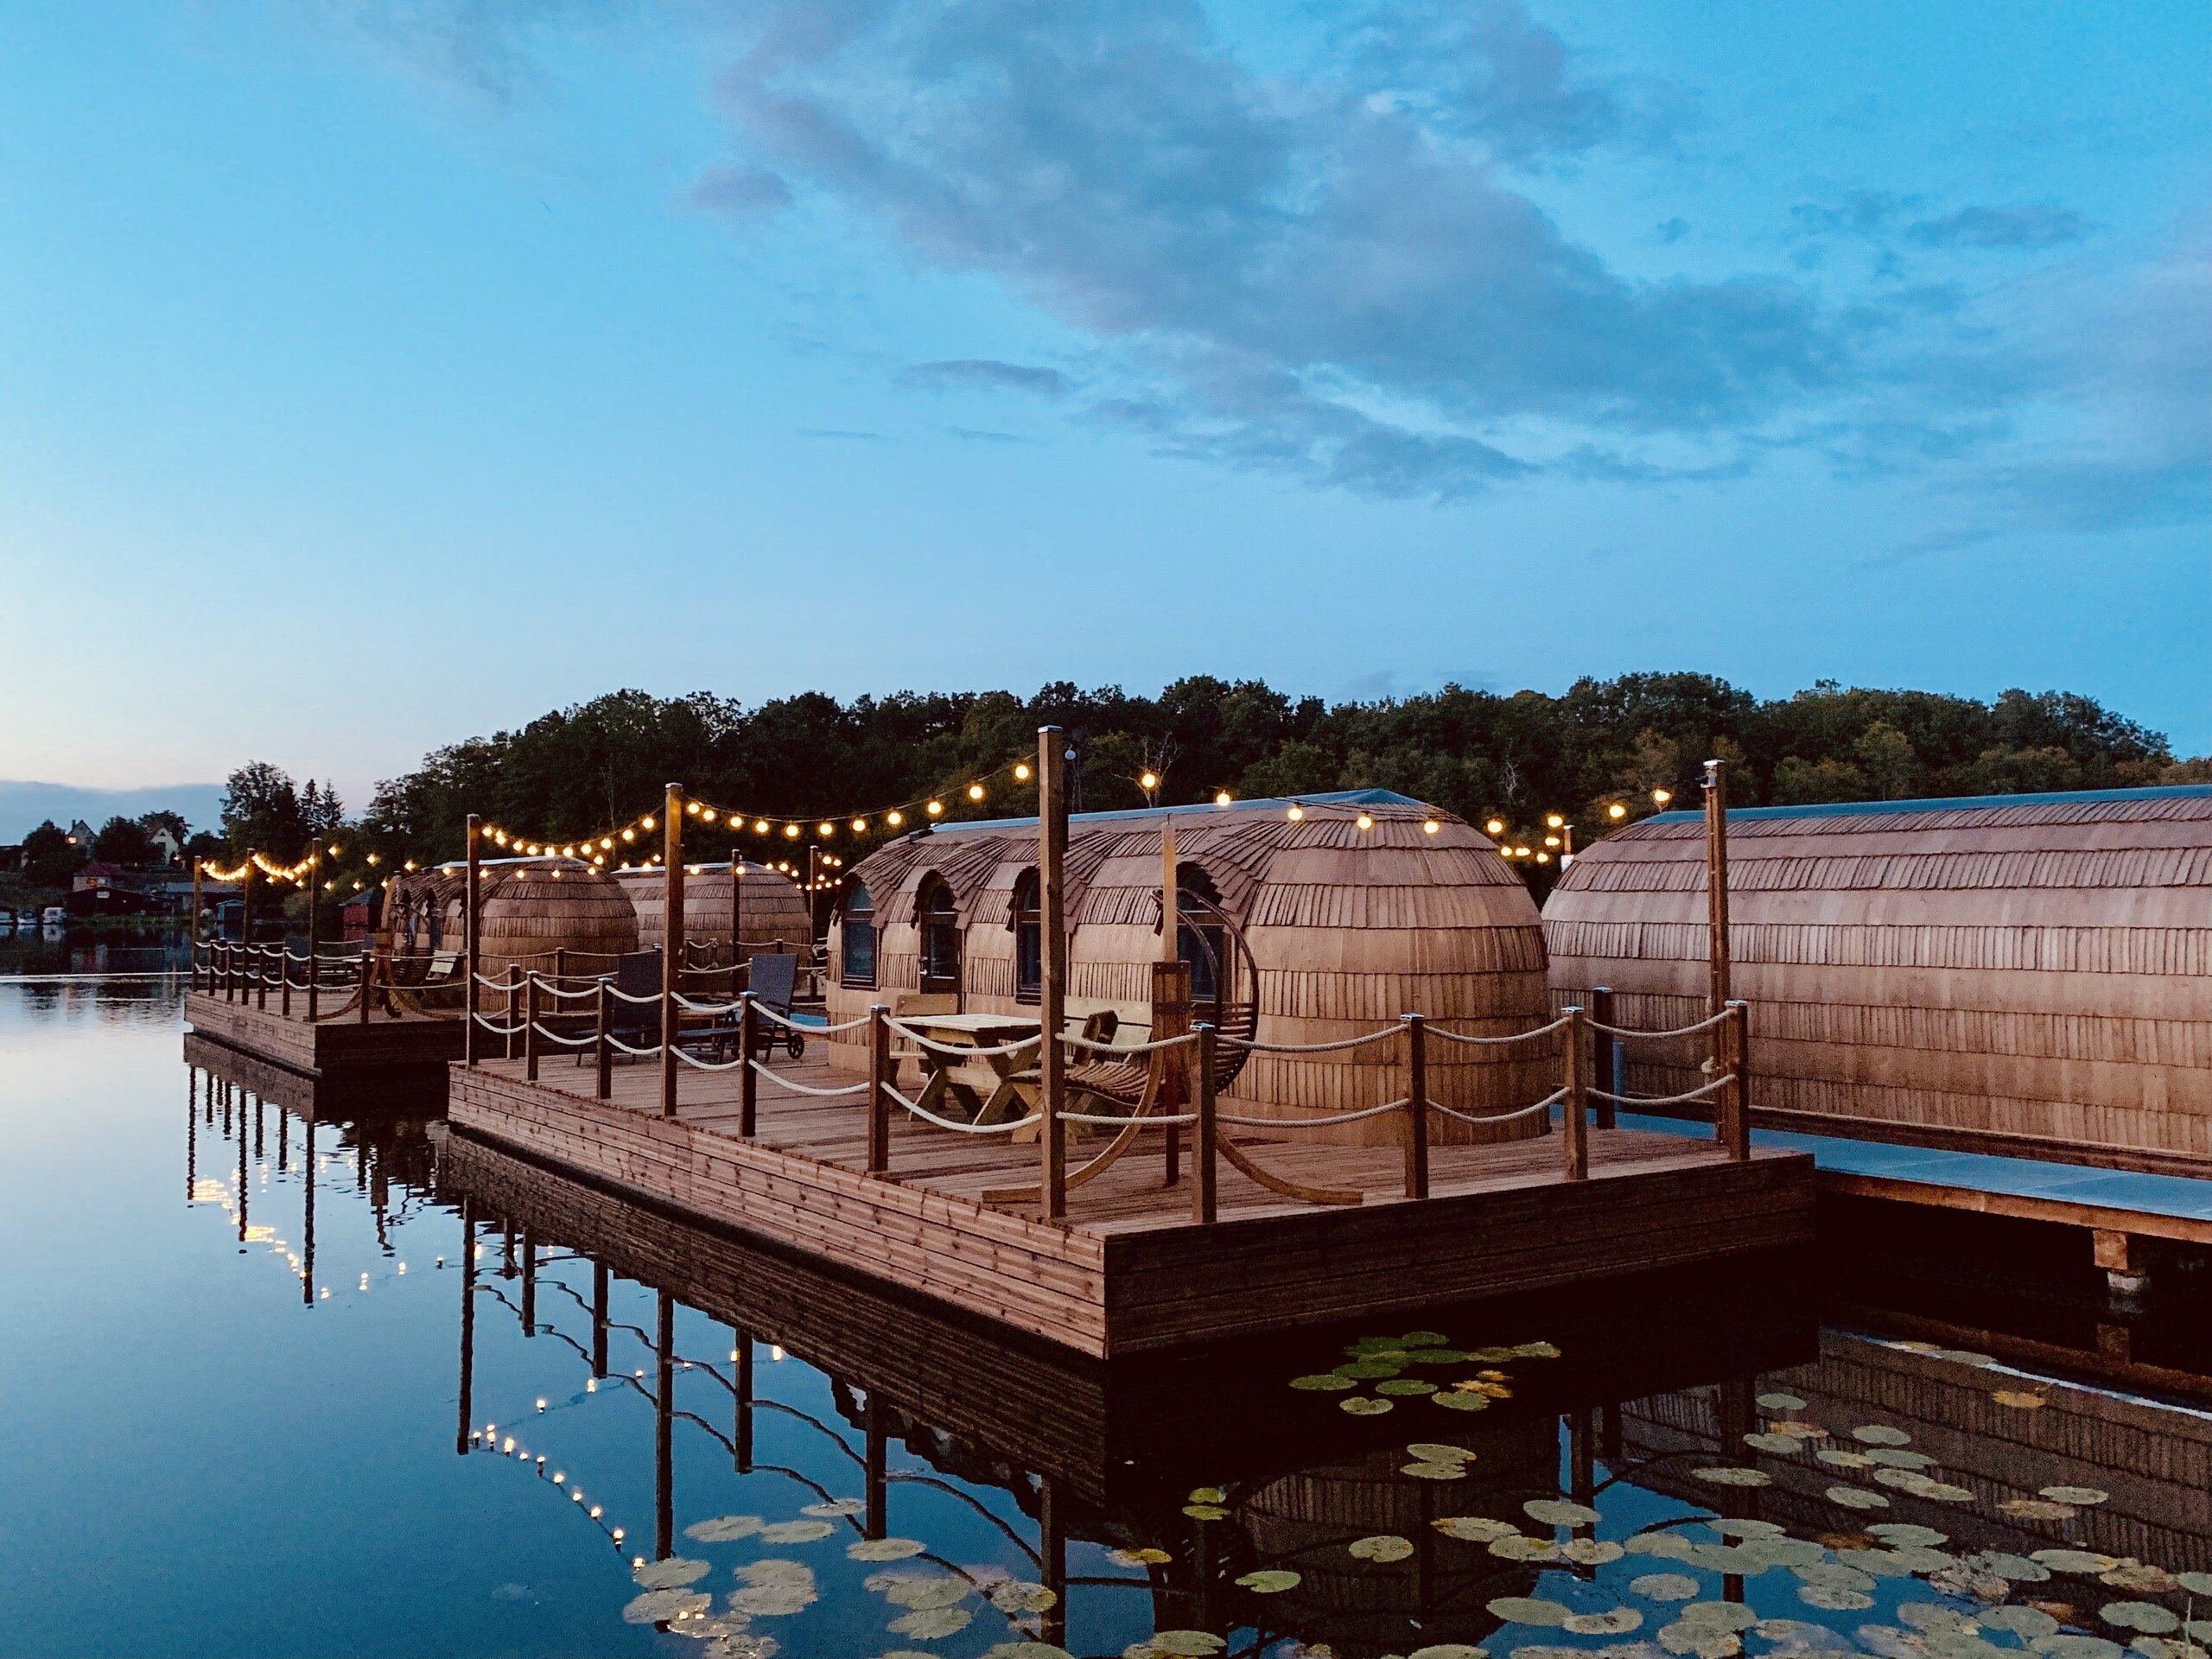 Cabins on a lake in Germany